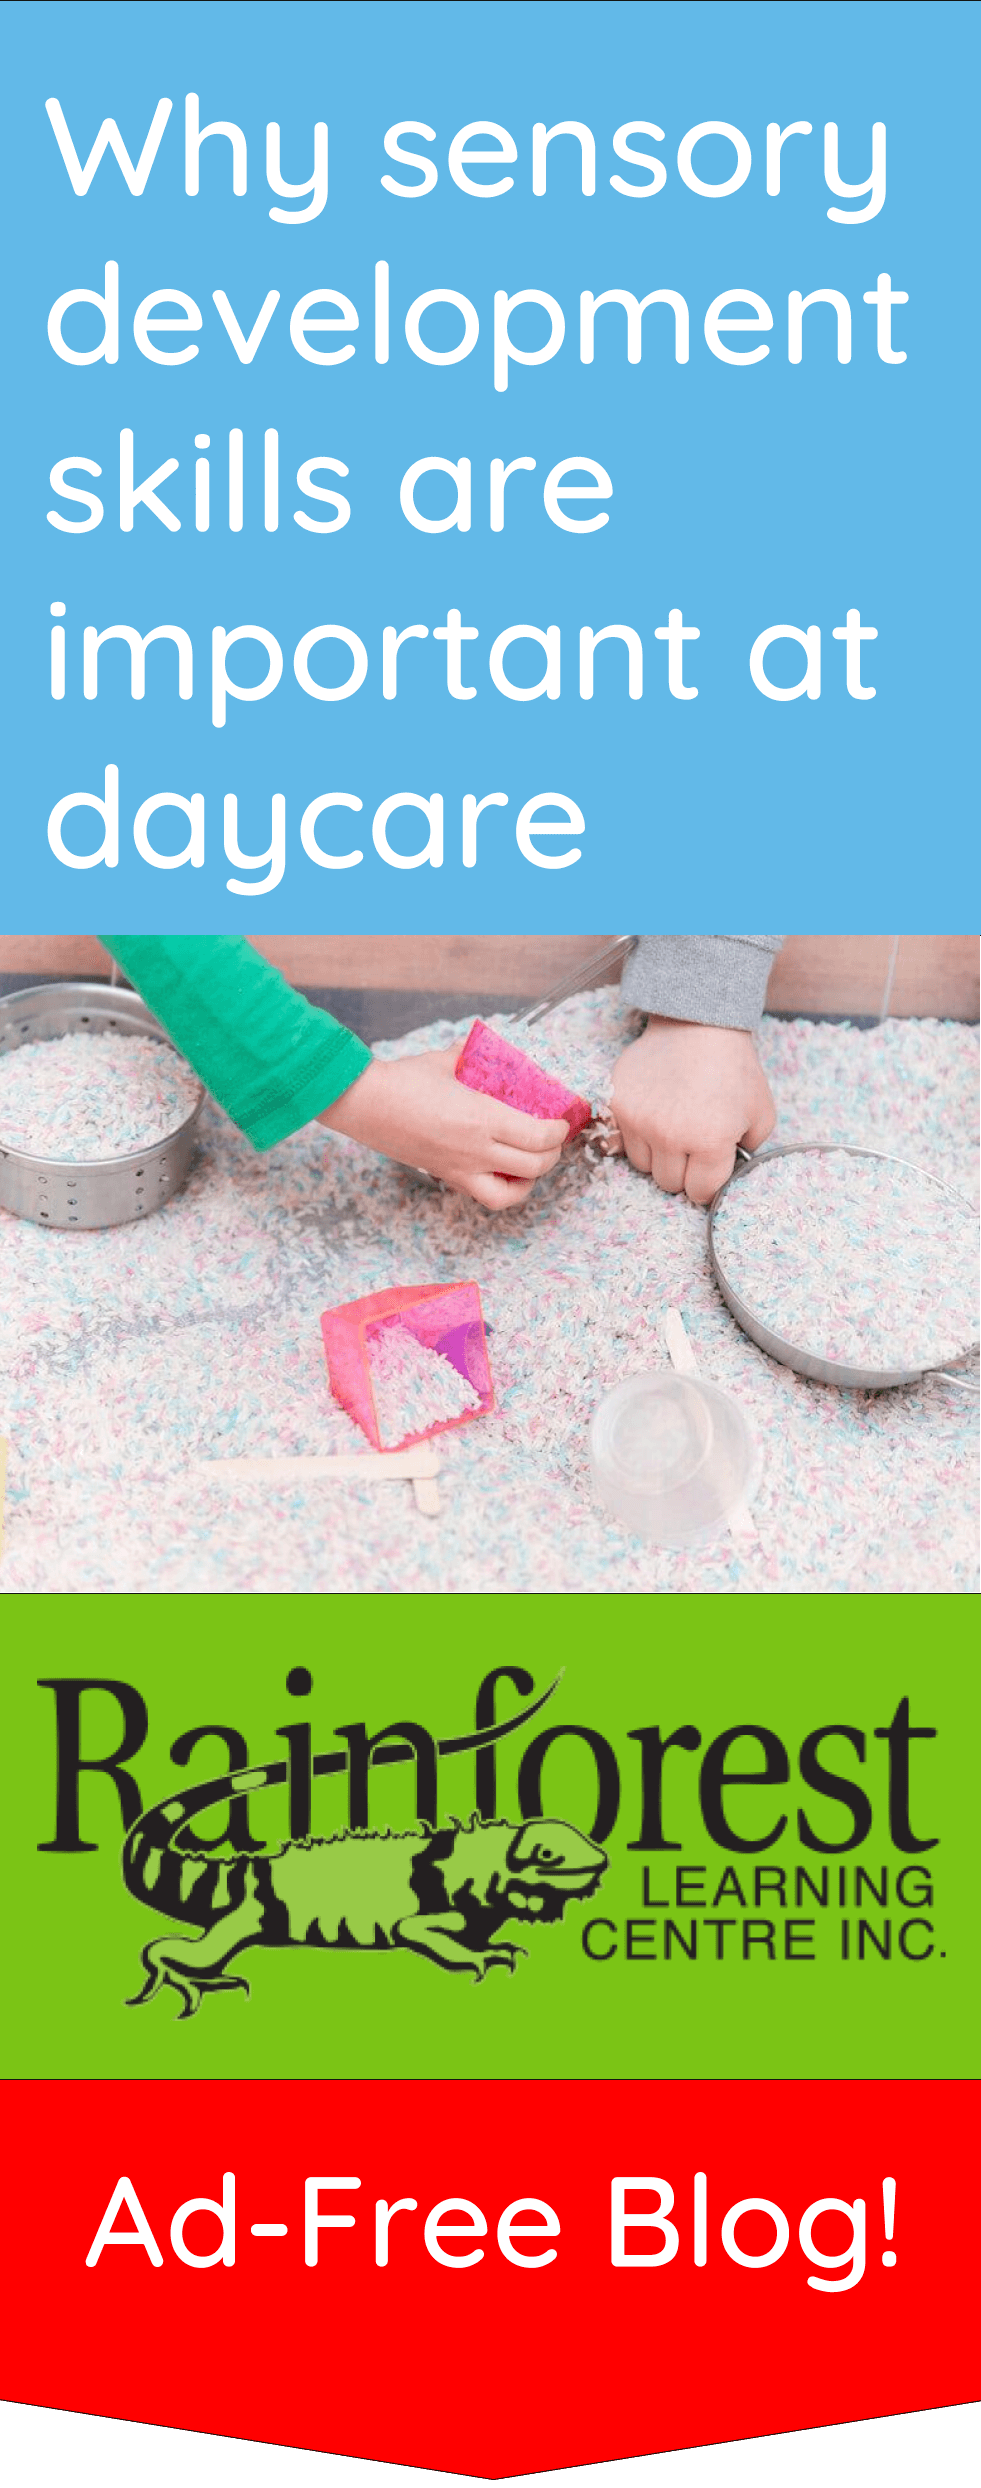 why sensory development skills important at daycare article pinterest image